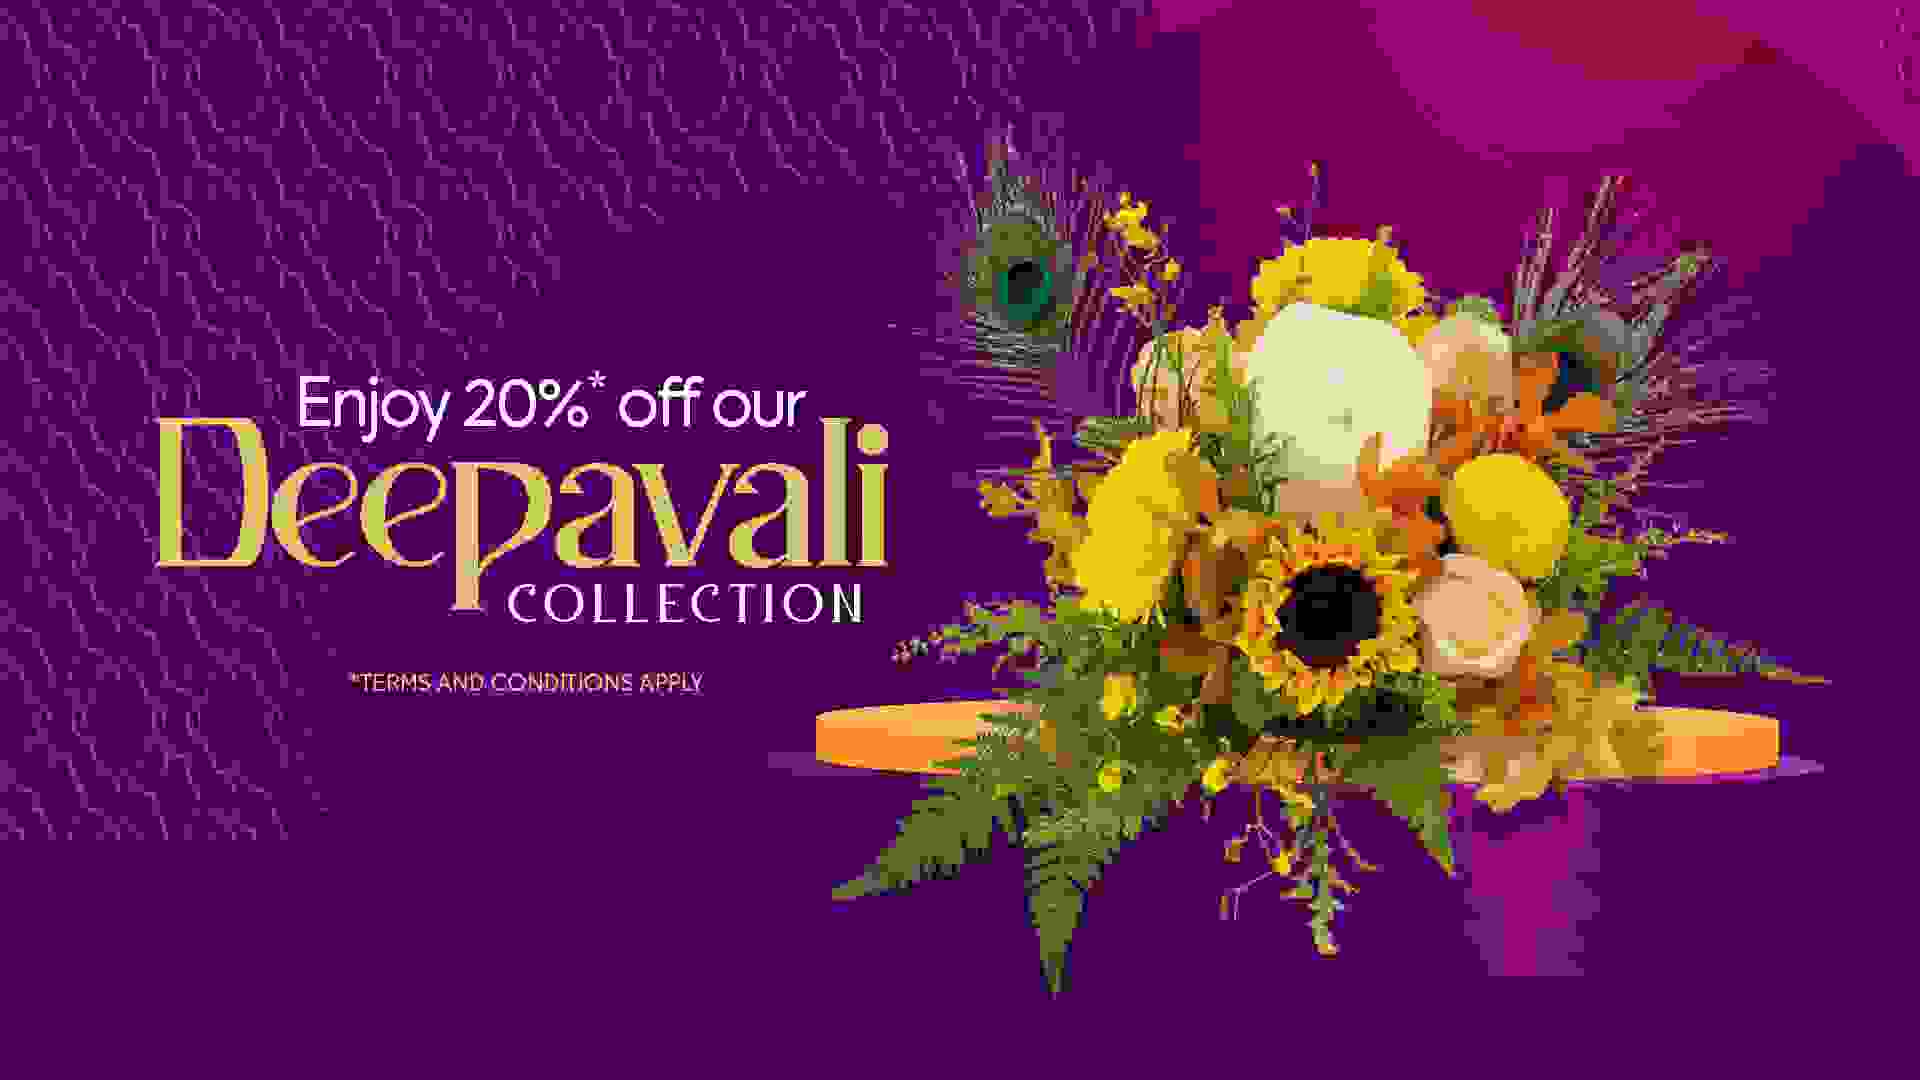 Enjoy 20% off Deepavali Collection, with a minimum spending of $30 per order!